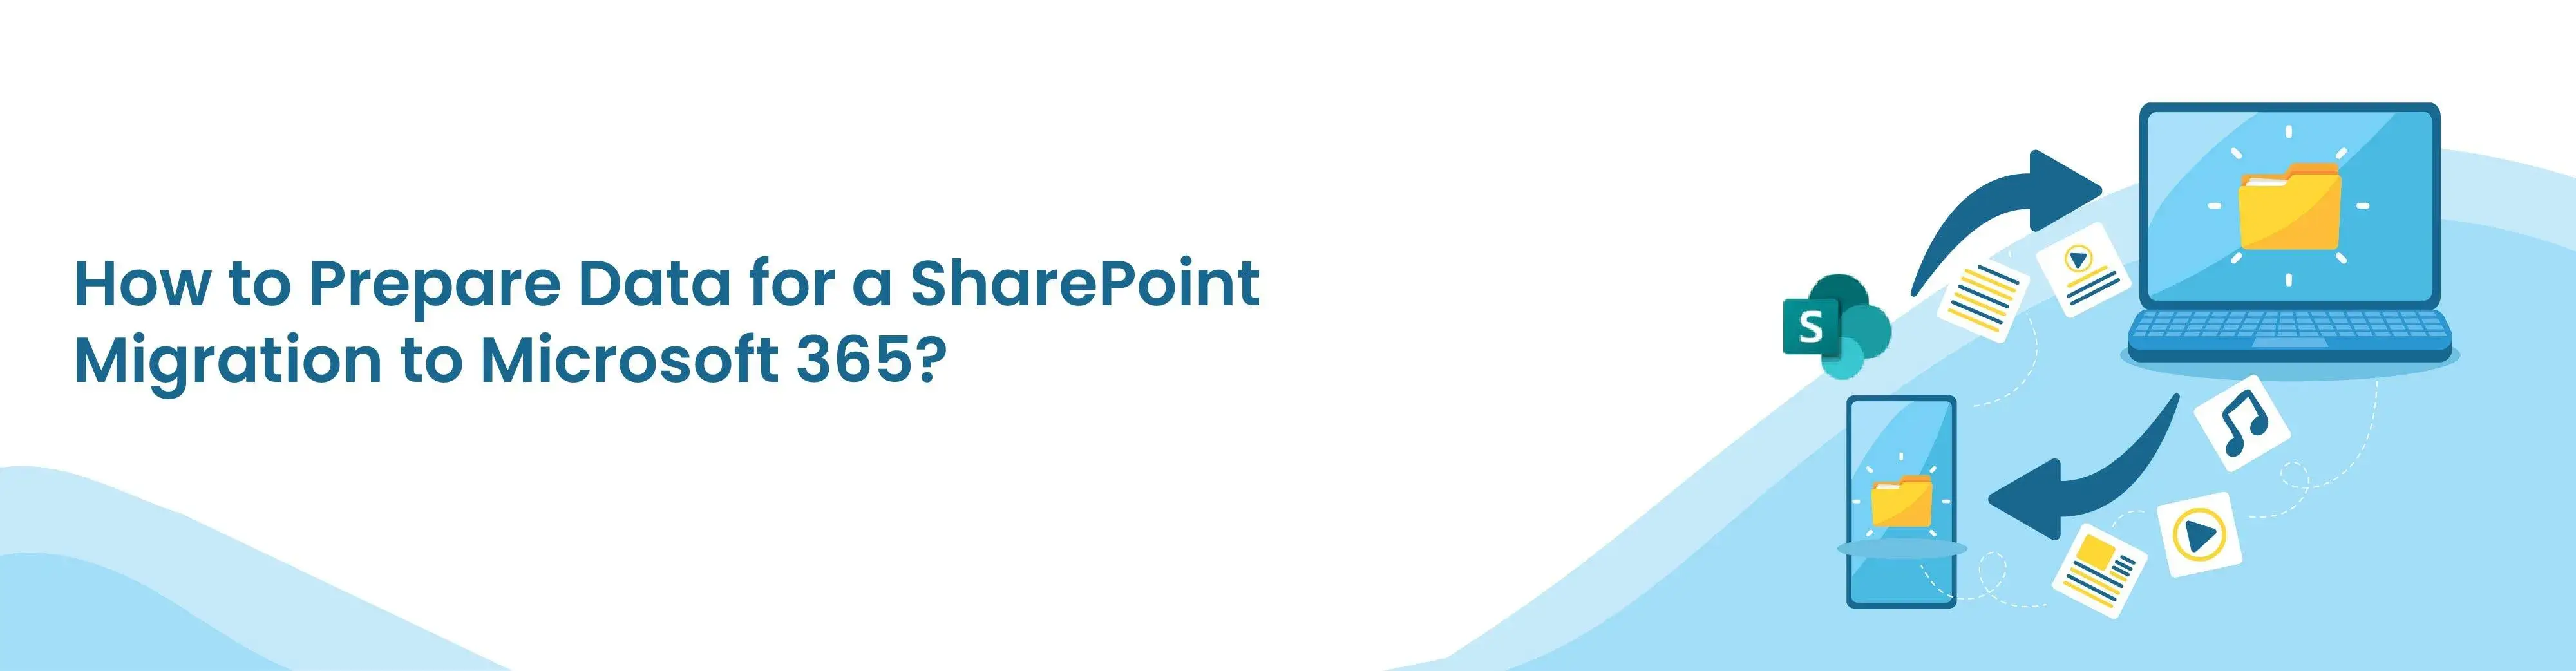 1712297583How to Prepare Data for a SharePoint Migration to Microsoft 365.webp